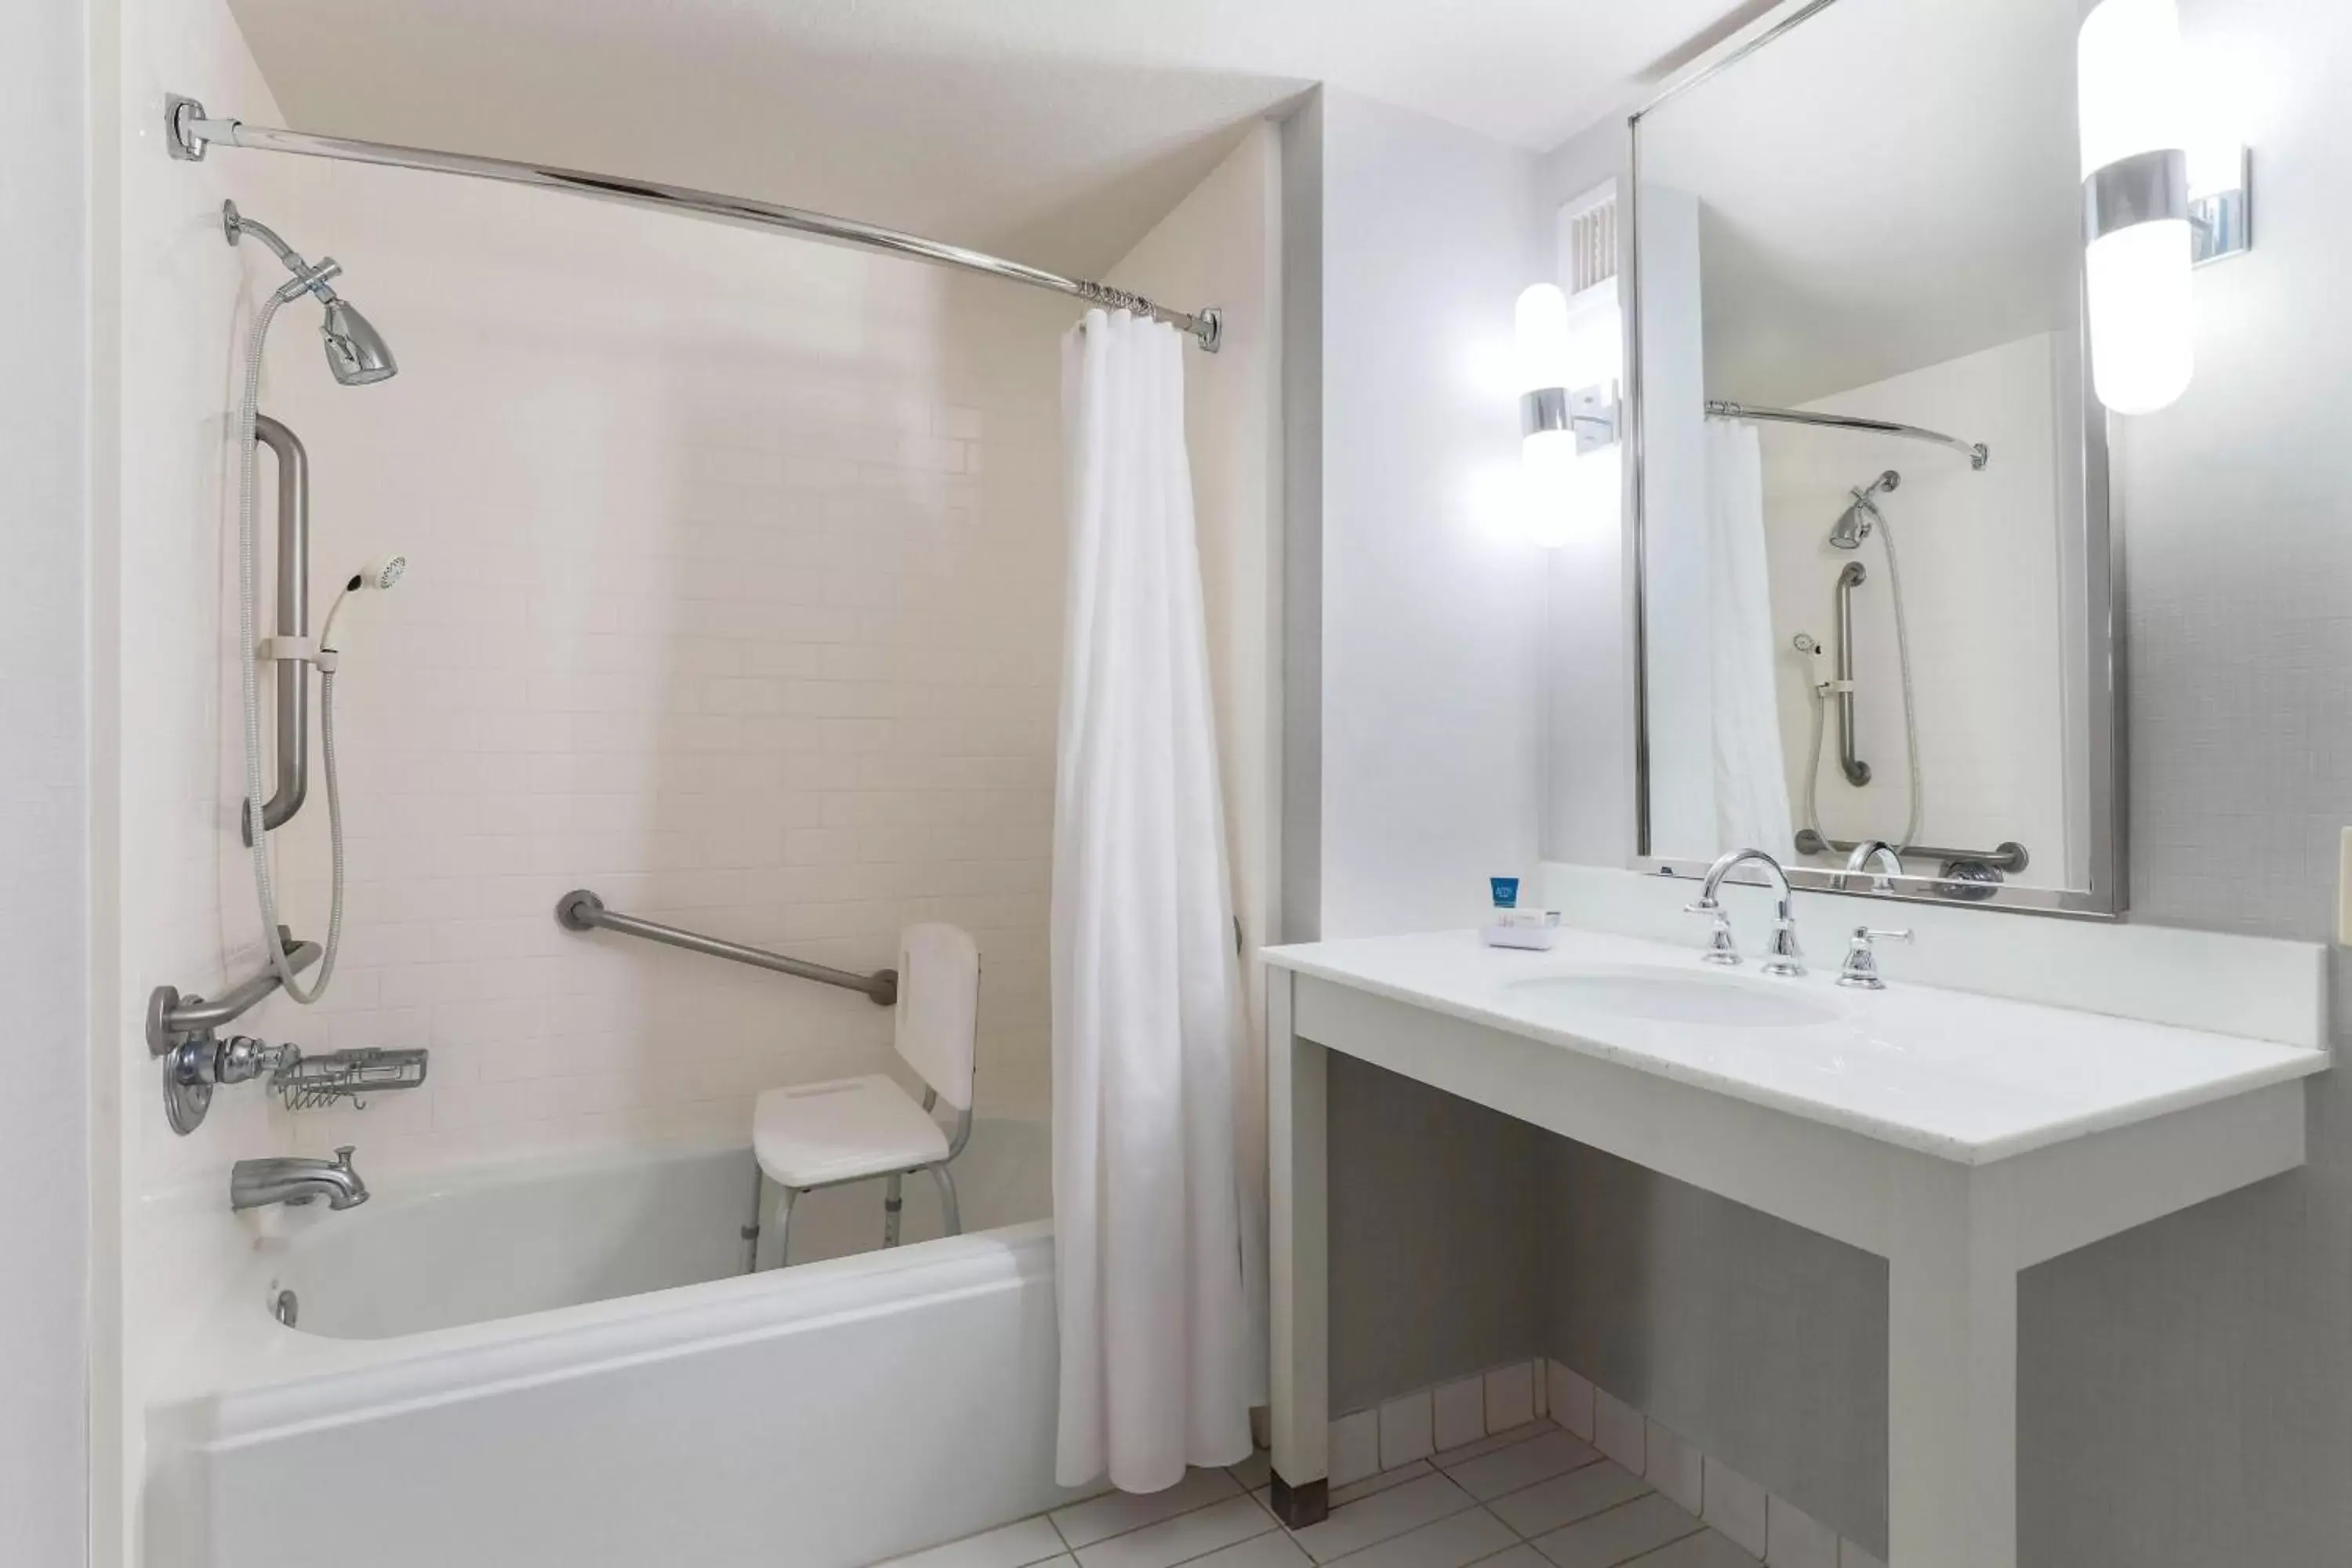 Bathroom in Four Points by Sheraton, Ontario-Rancho Cucamonga